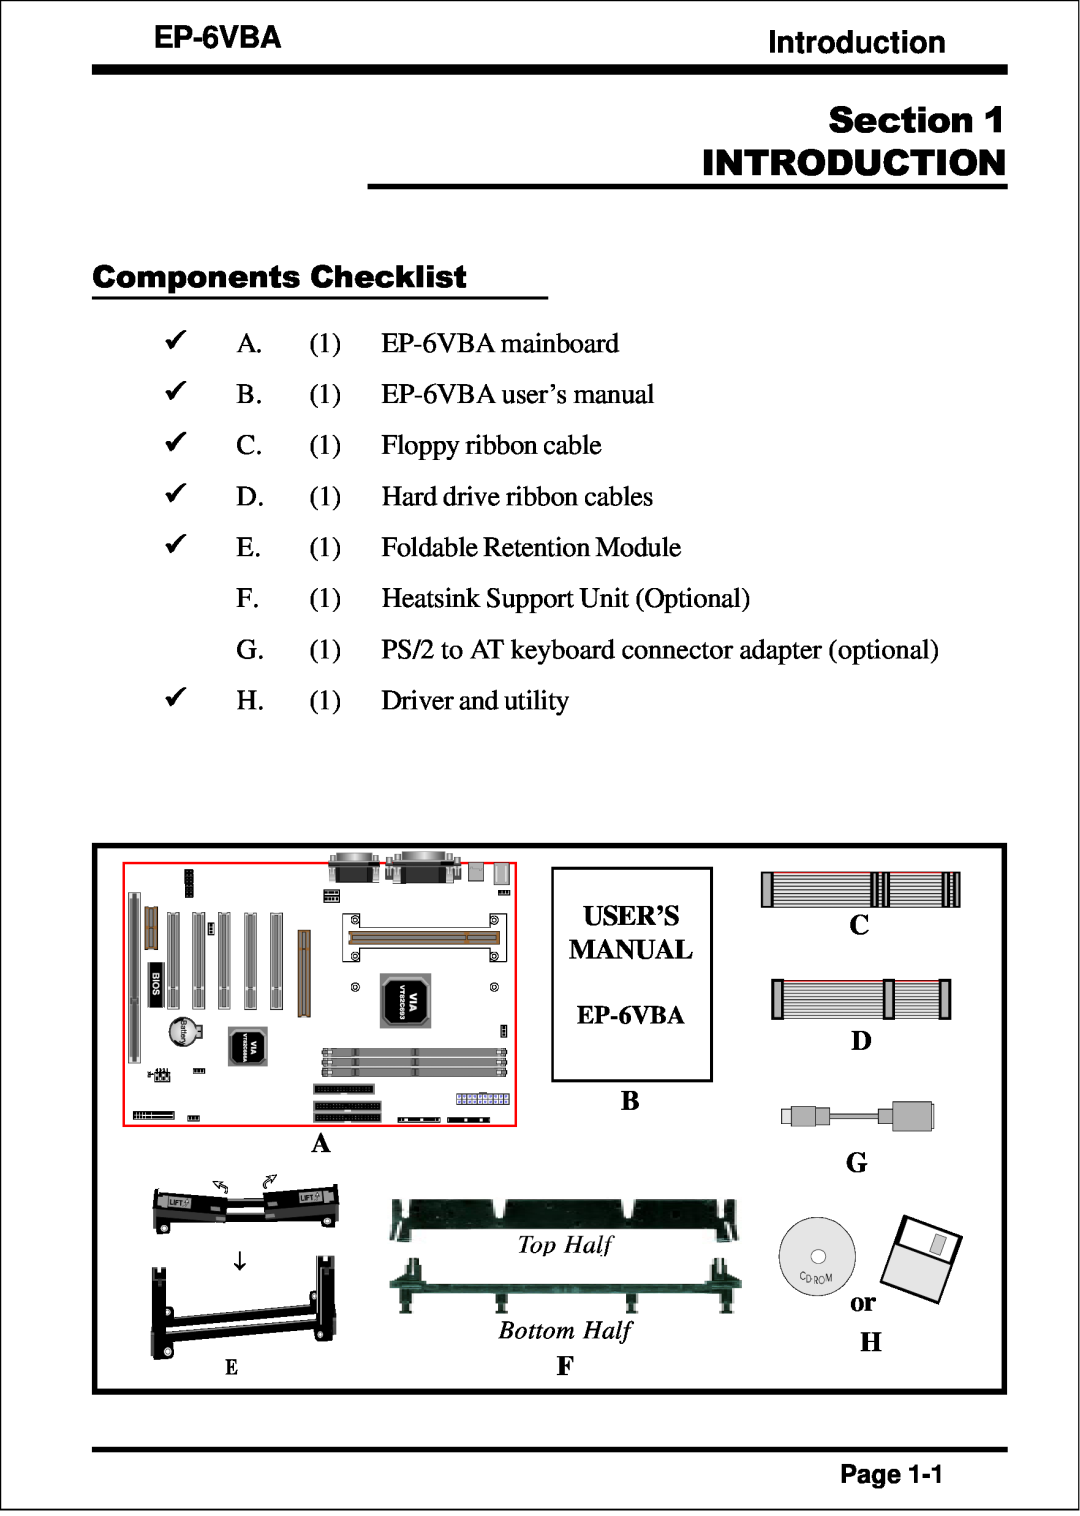 EPoX Computer EP-6VBA specifications Section INTRODUCTION, Introduction, Components Checklist, B A G 